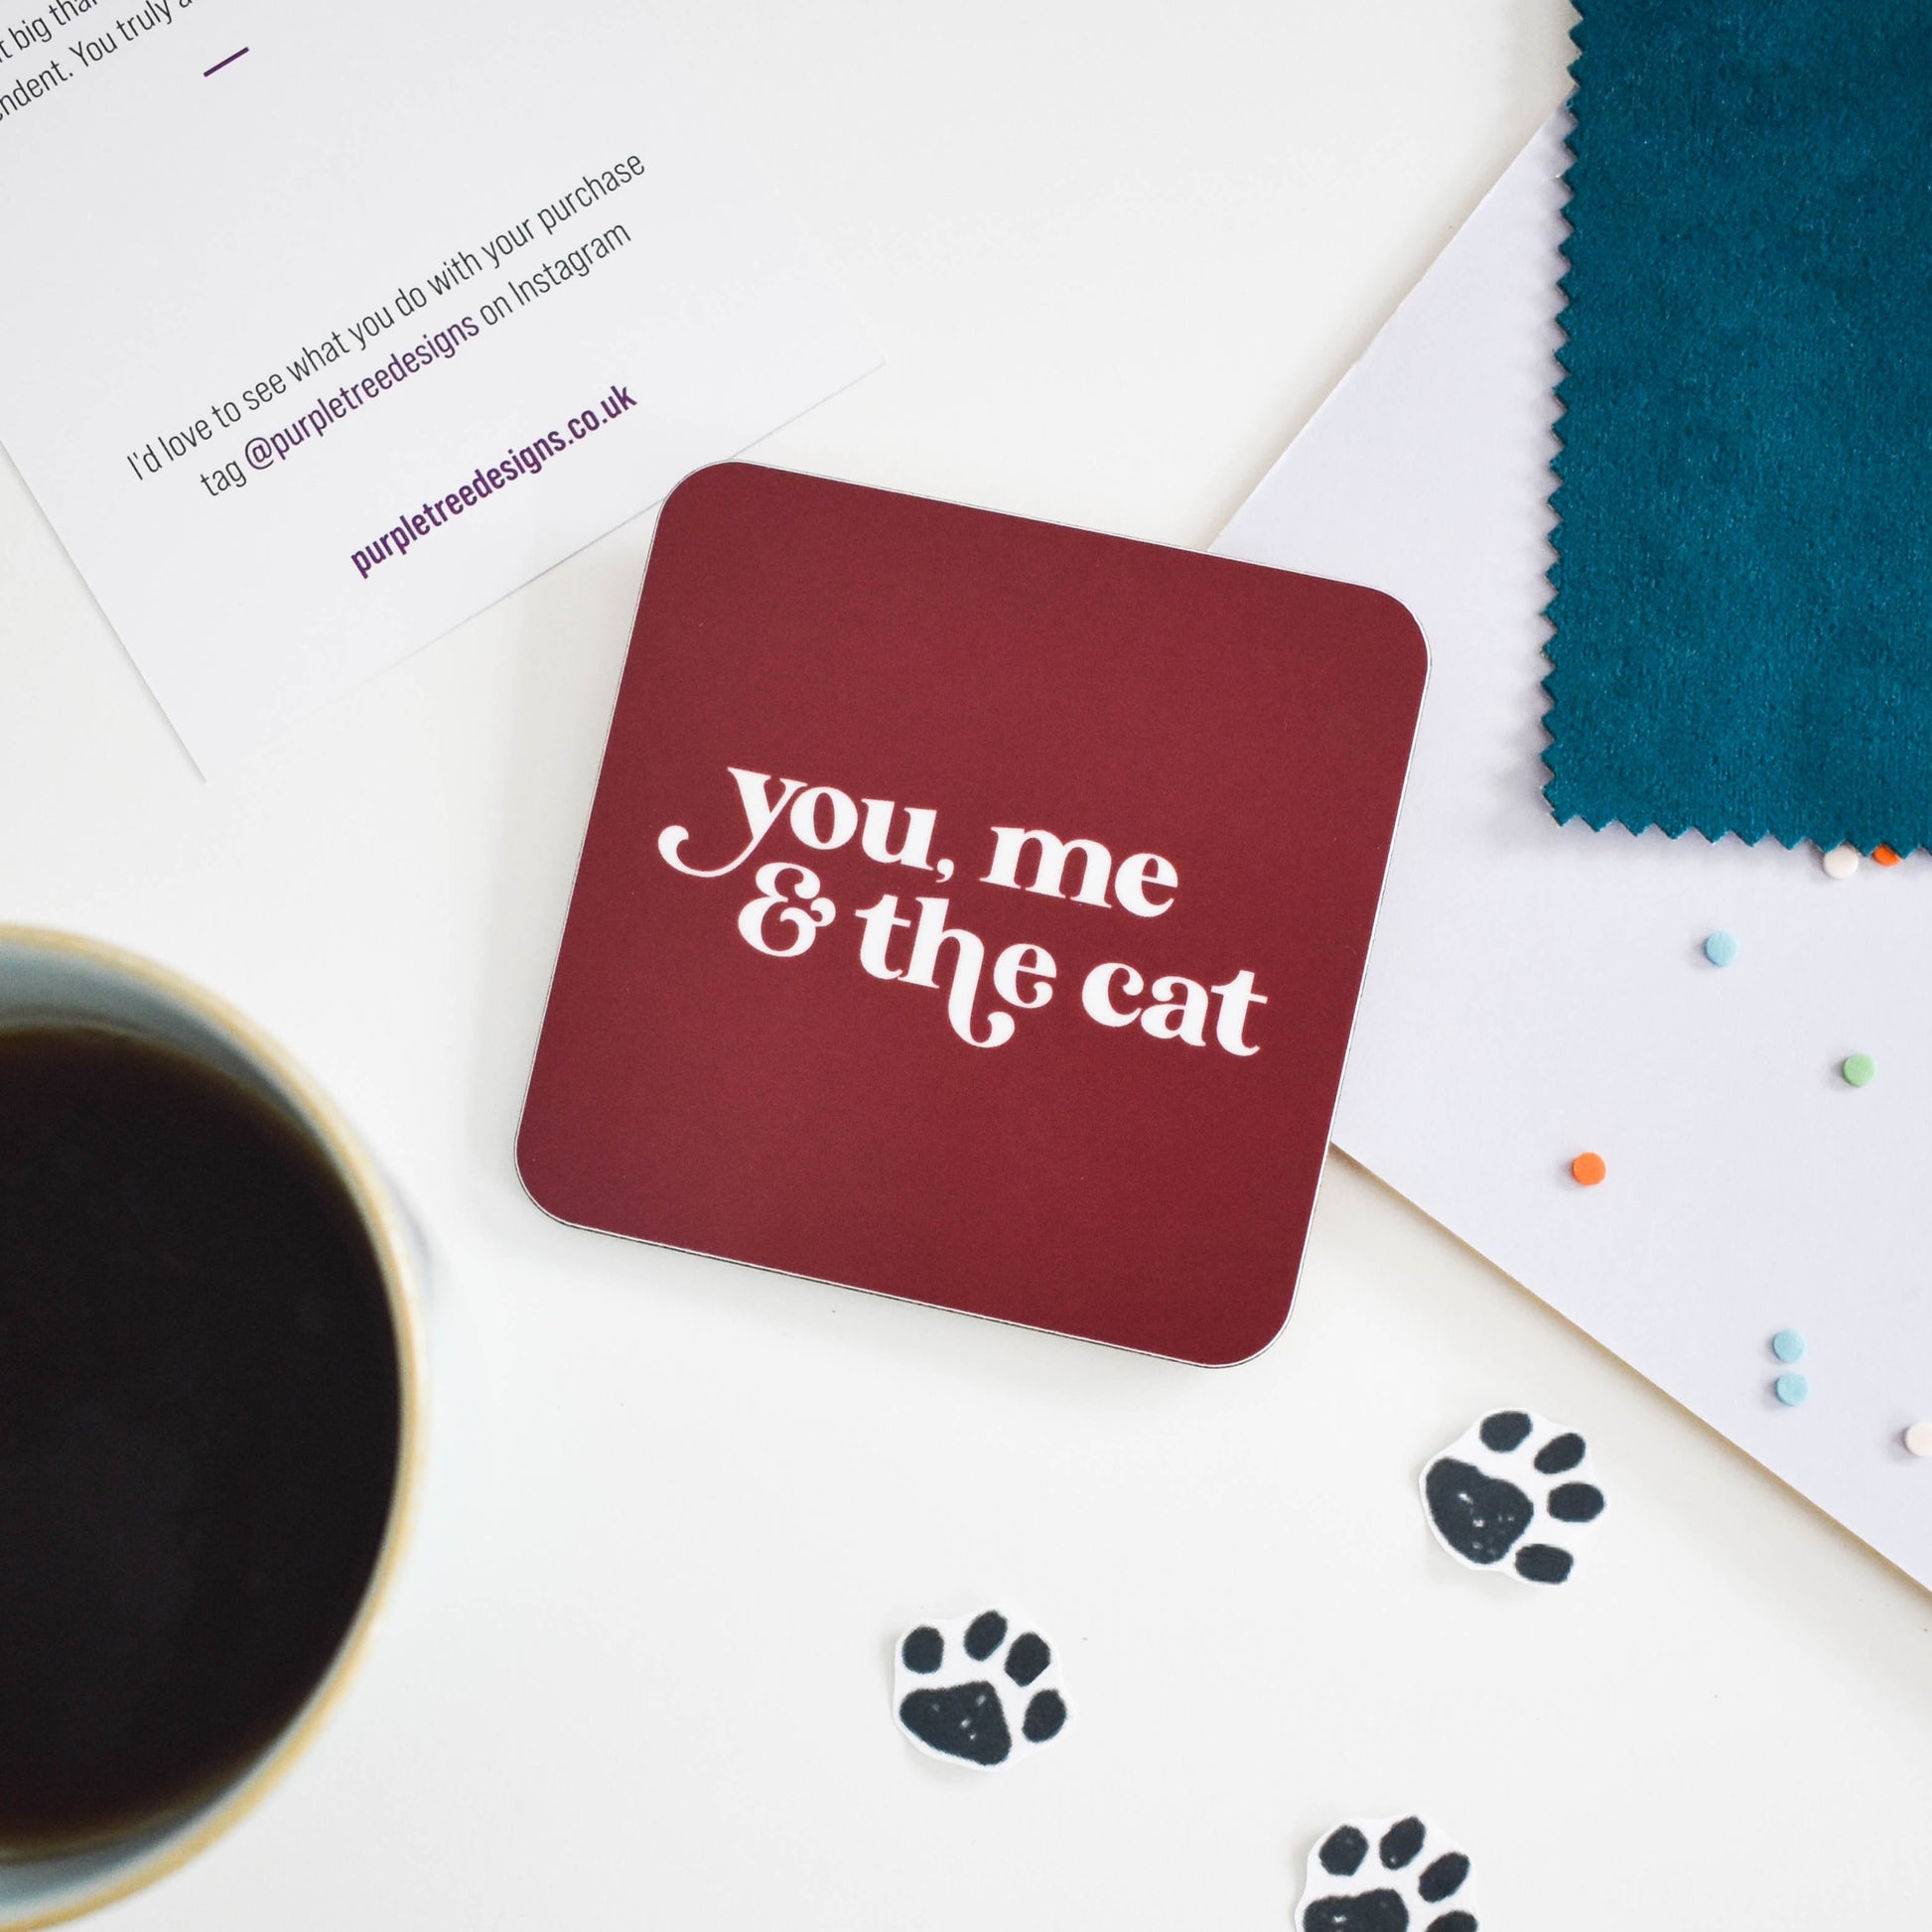 You me & the cat coaster from Purple Tree Designs